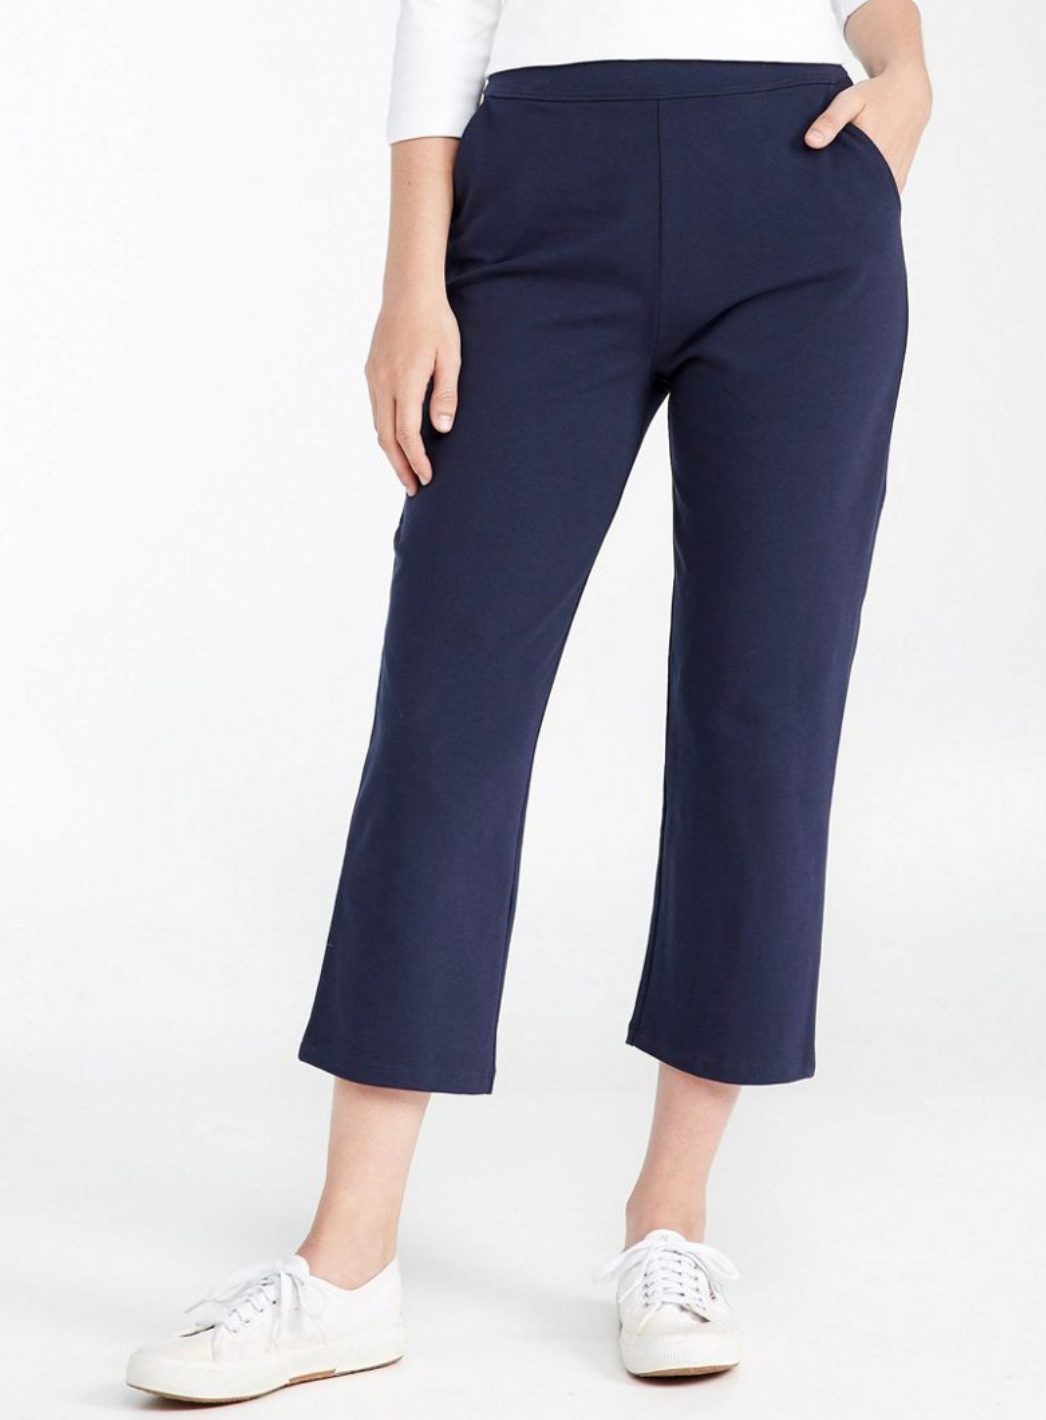 Womens Clothing Trousers Varley Cotton Keswick Pants Slacks and Chinos Capri and cropped trousers 